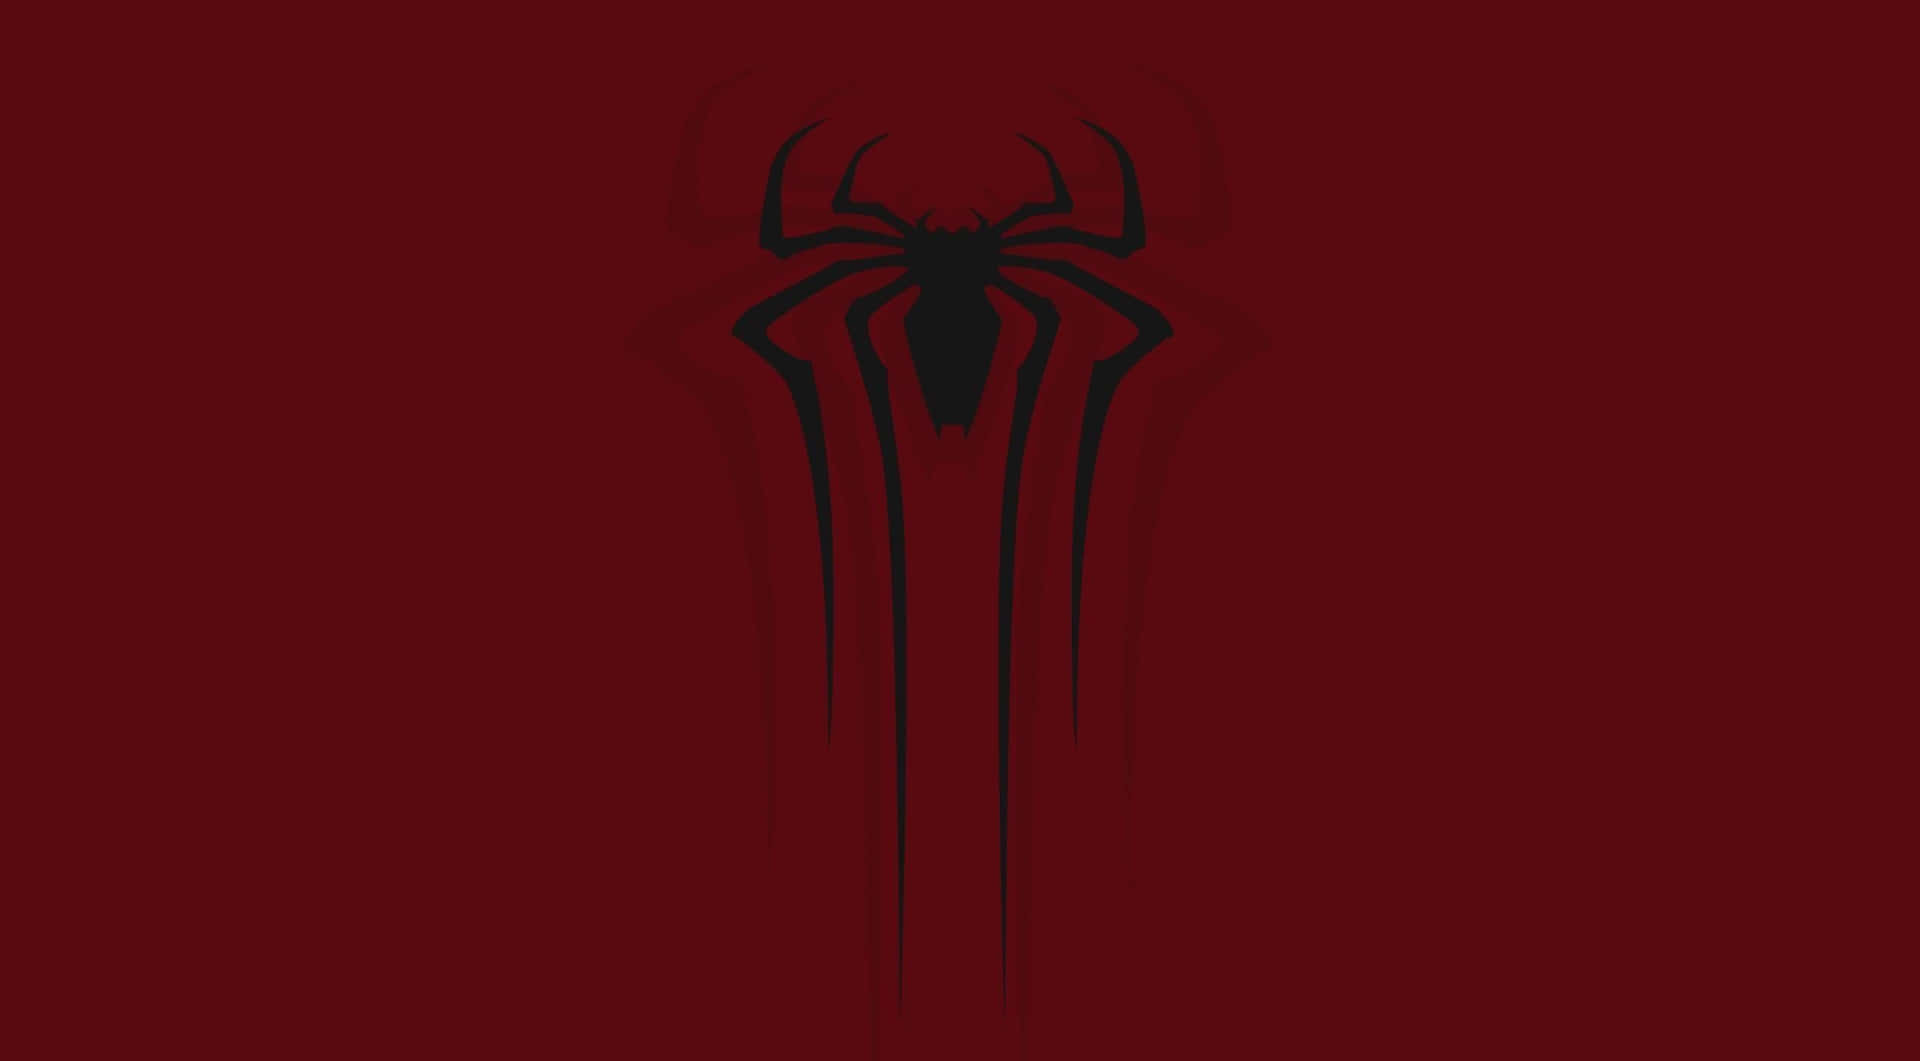 The Spider - Man Logo On A Red Background Wallpaper